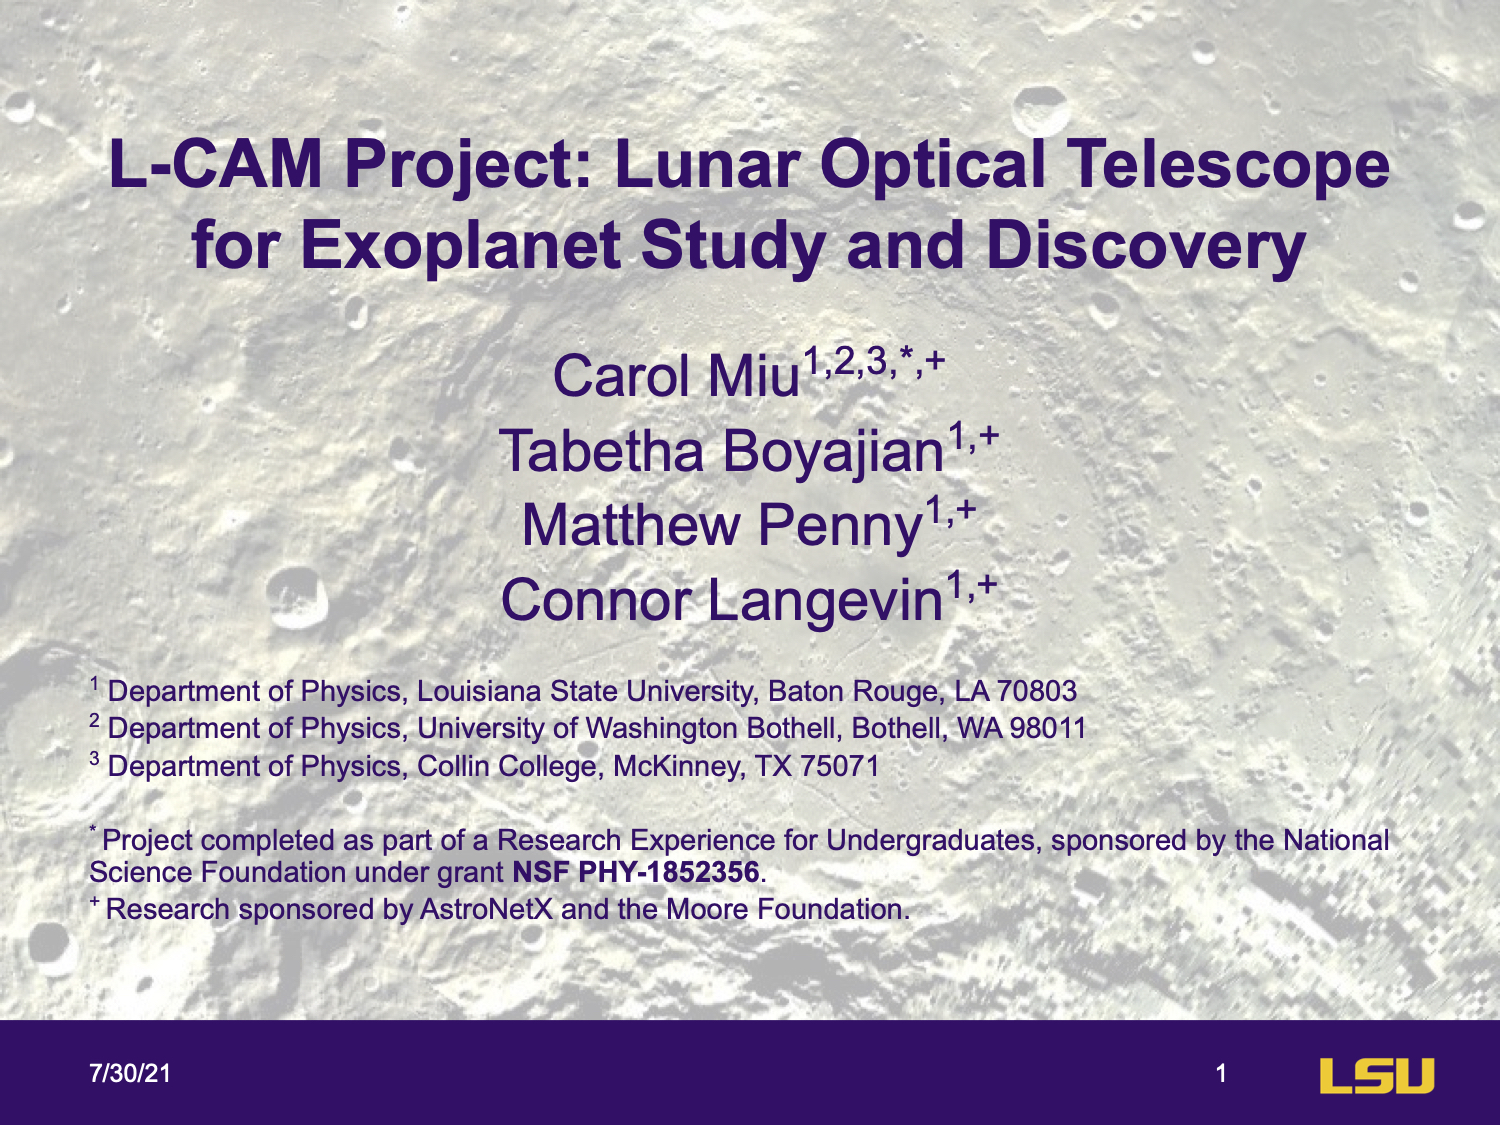 L-CAM Lunar Optical Telescope for Exoplanet Study and Discovery Poster